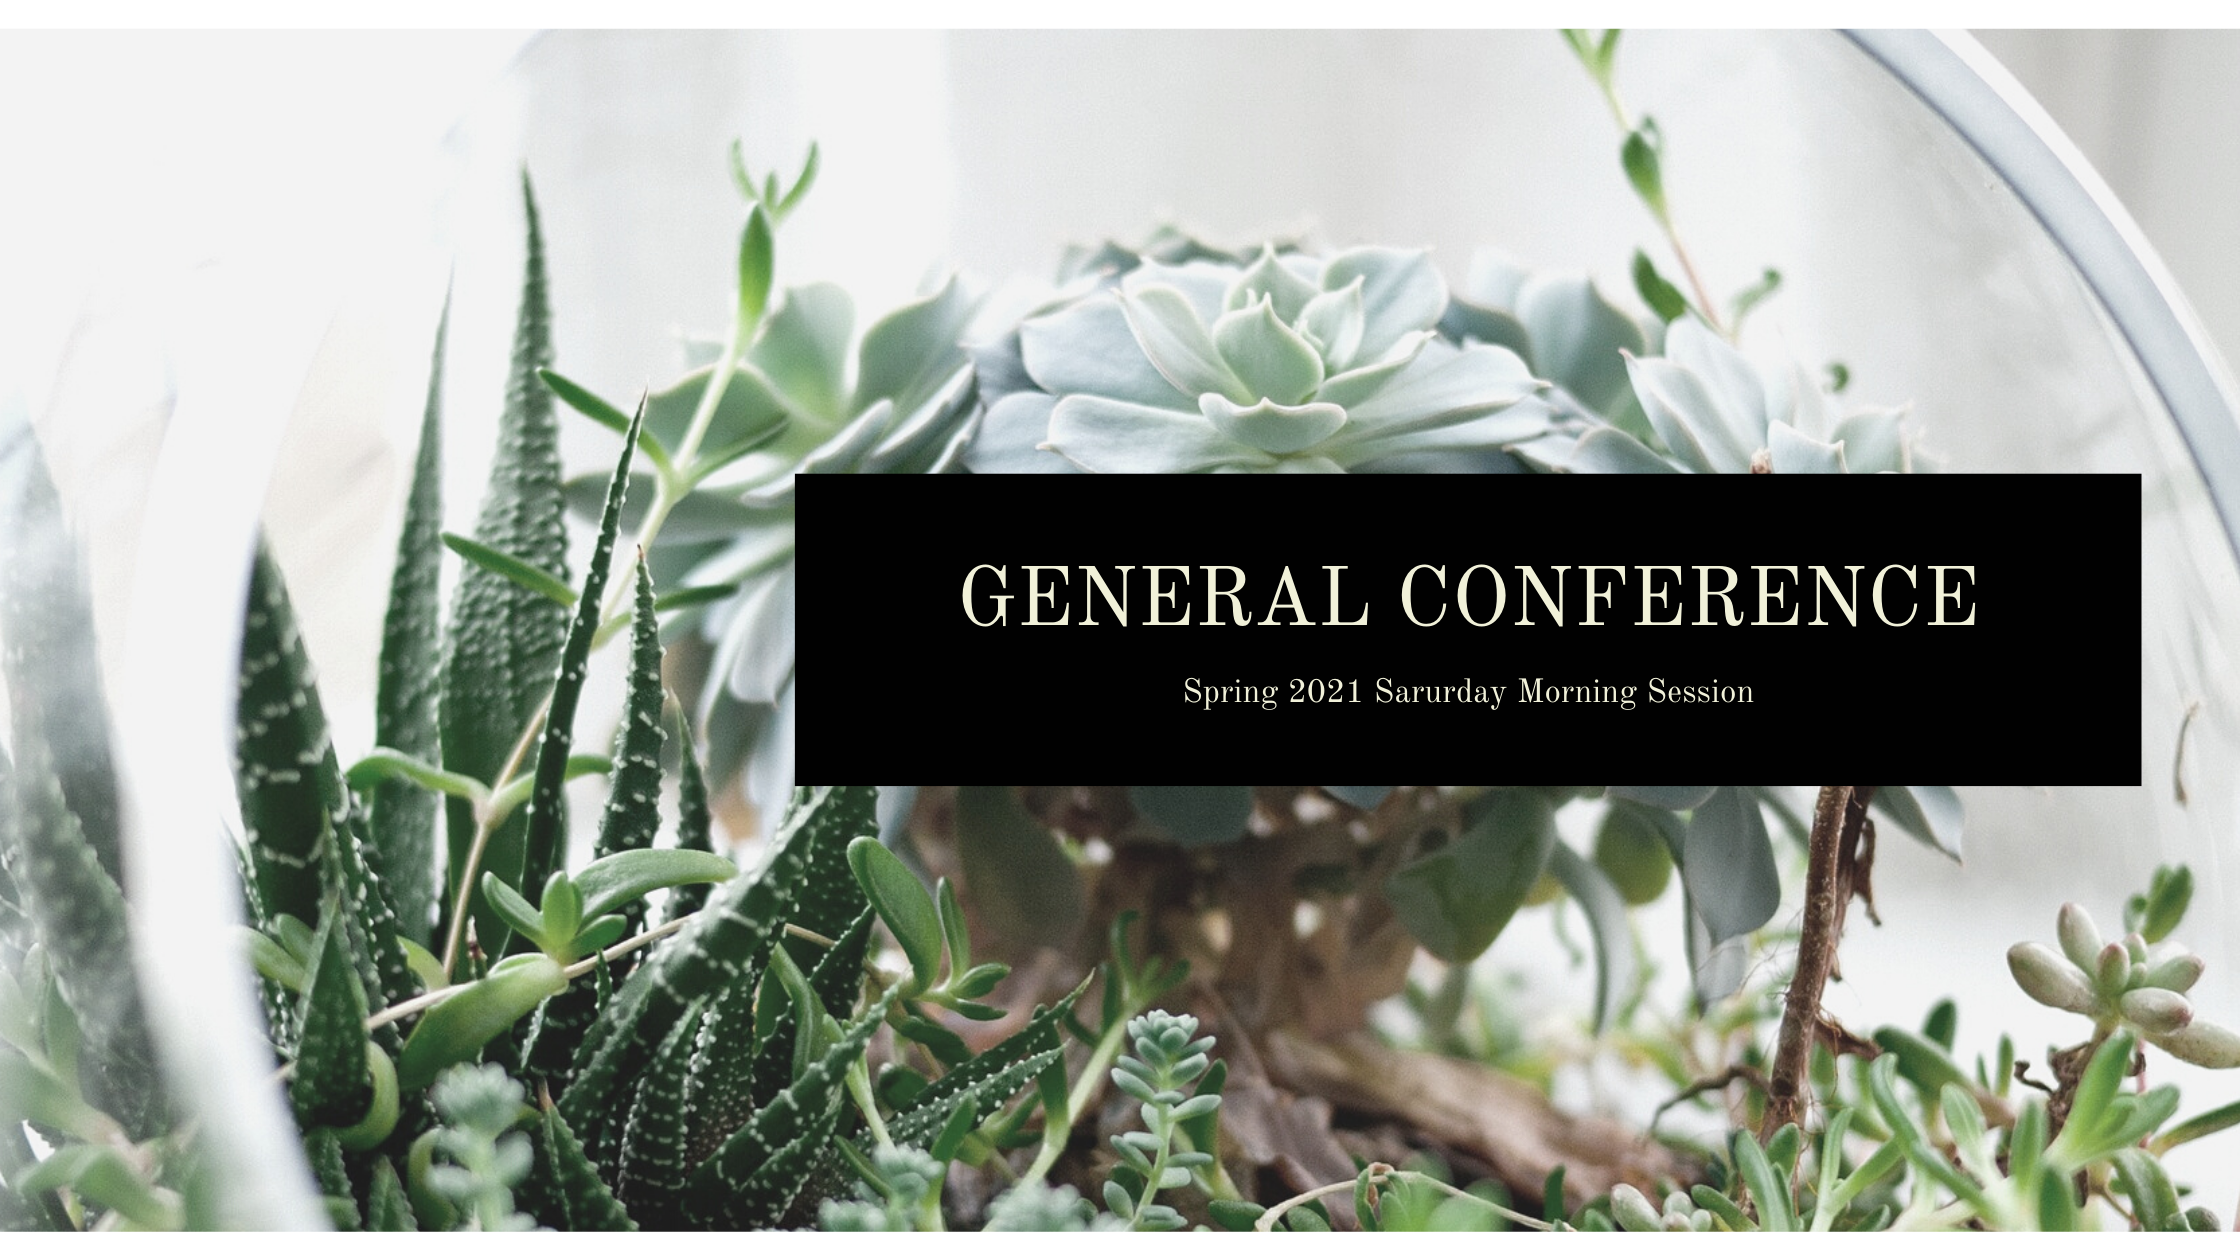 Top 19 Tweets From The Saturday Morning Spring Session 2021’s General Conference